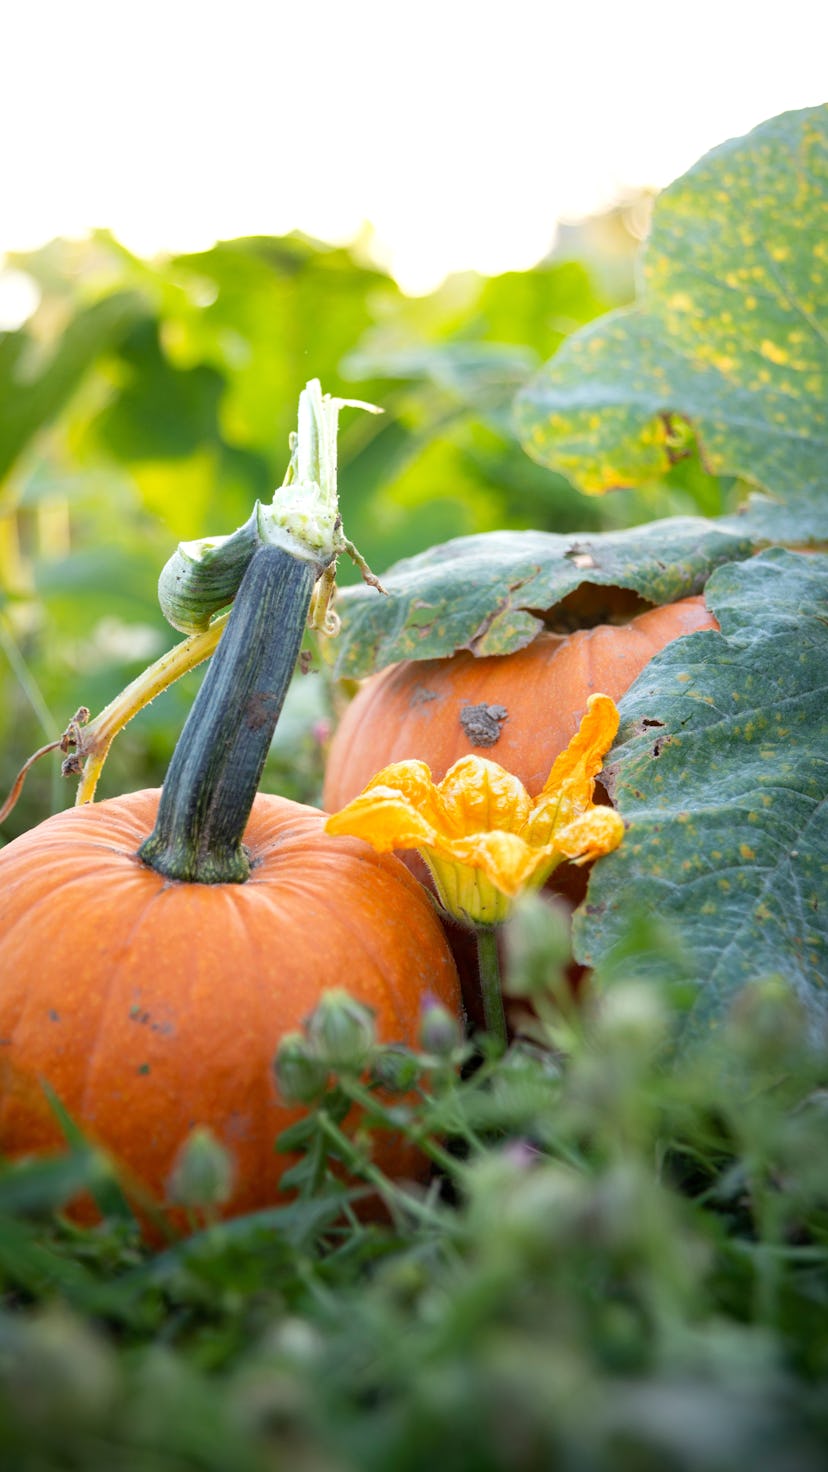 Two pumpkins on the vine in a pumpkin patch